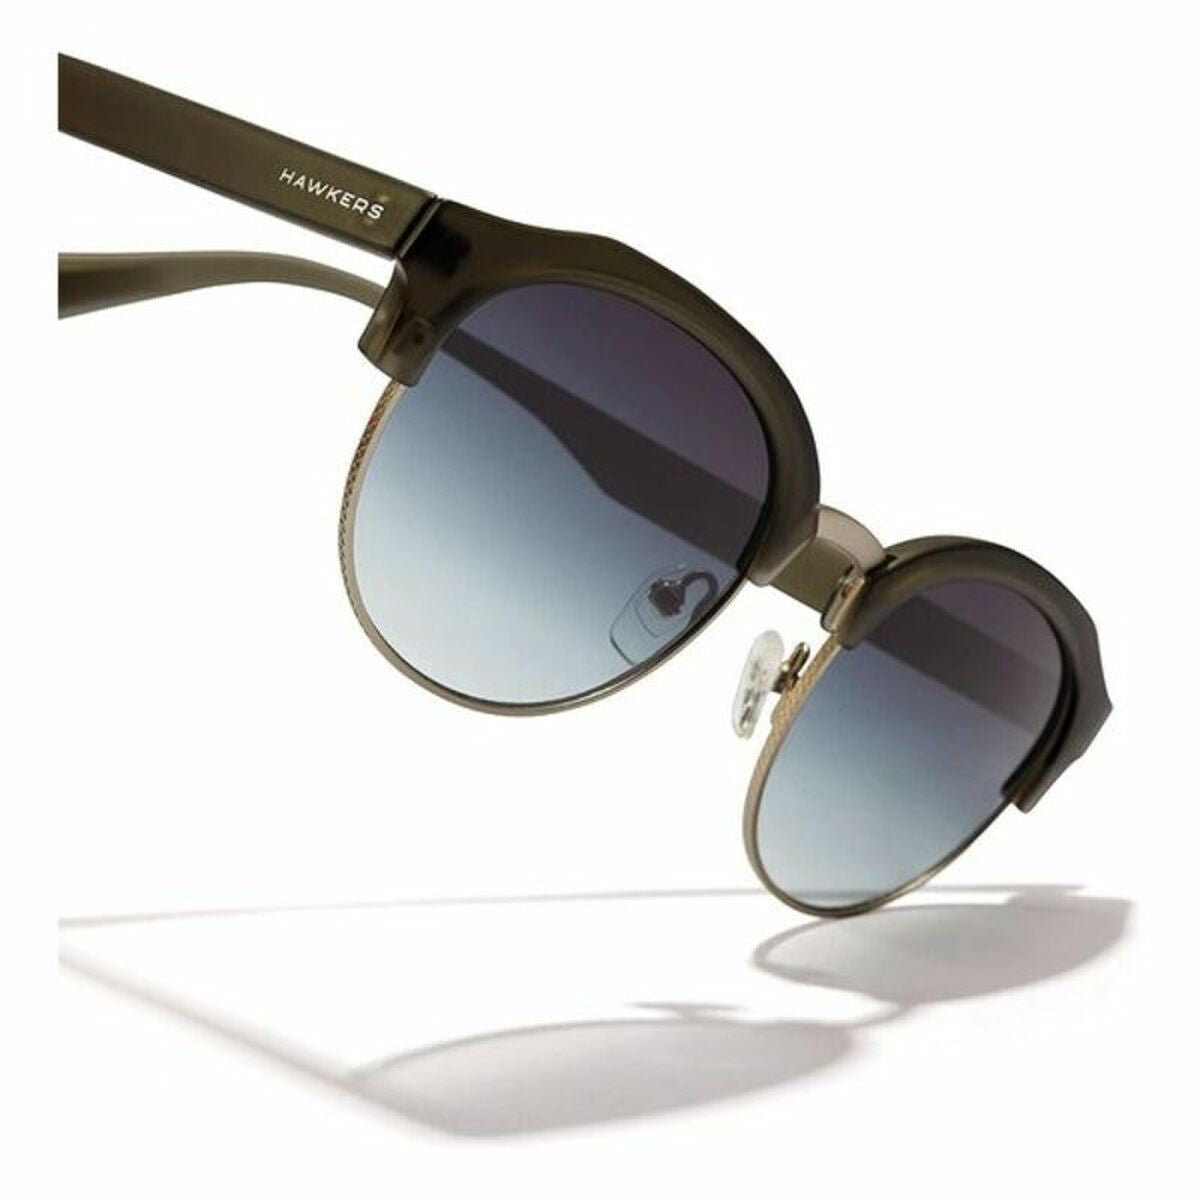 Unisex Sunglasses Classic Rounded Hawkers Grey